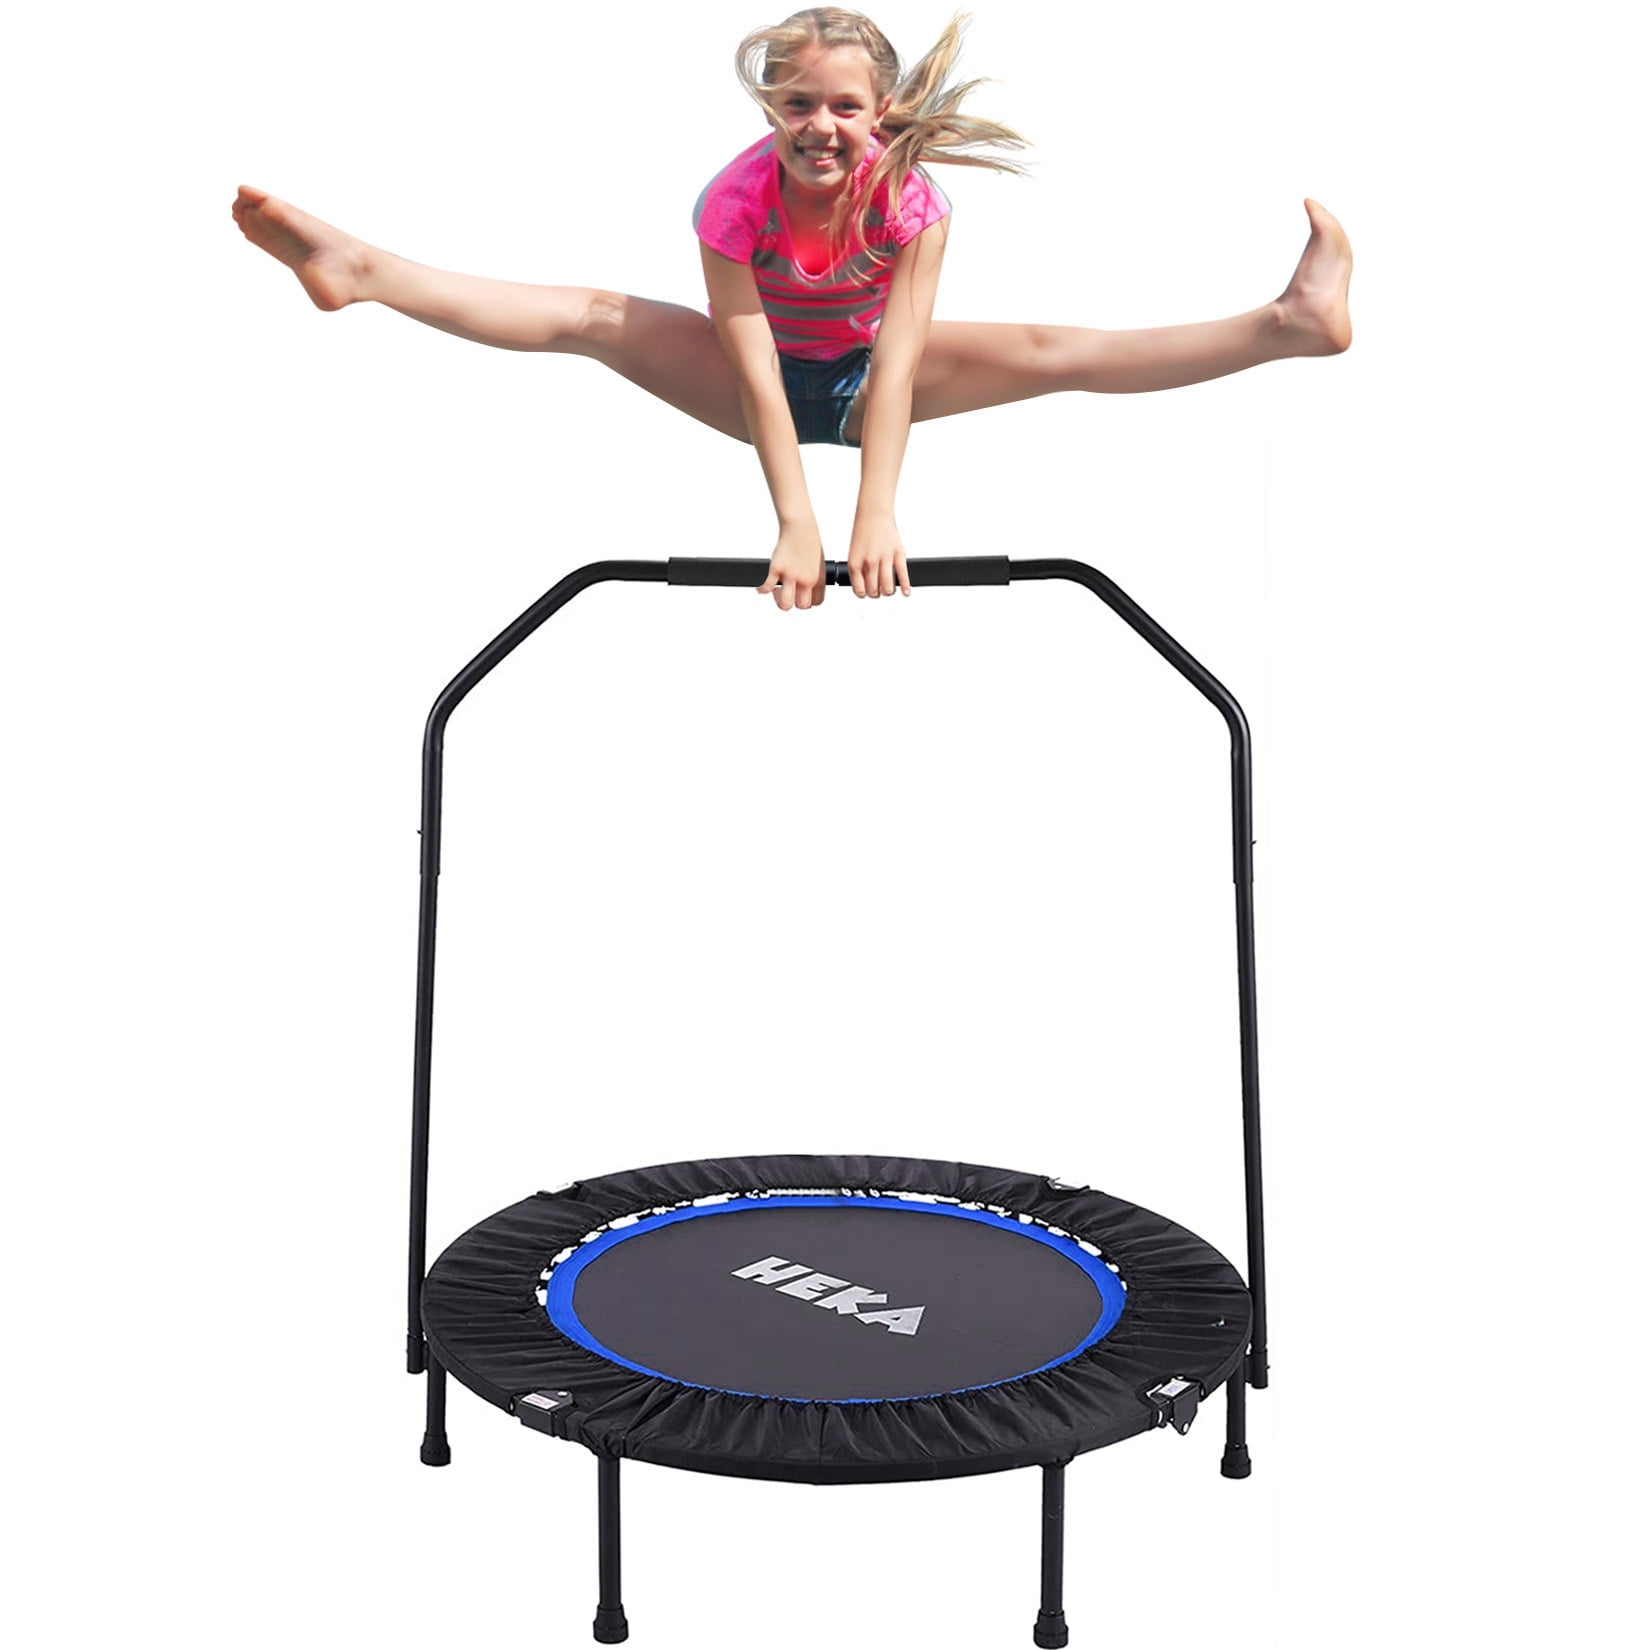 Giantex Mini Trampoline Max Load 330LBS Indoor Oval Rebounder Exercise Trampoline for Adult 2 Persons Foldable Fitness Trampoline w/ 5 Levels Height Adjustable Handle Kid Enjoy Parent-Child Time 